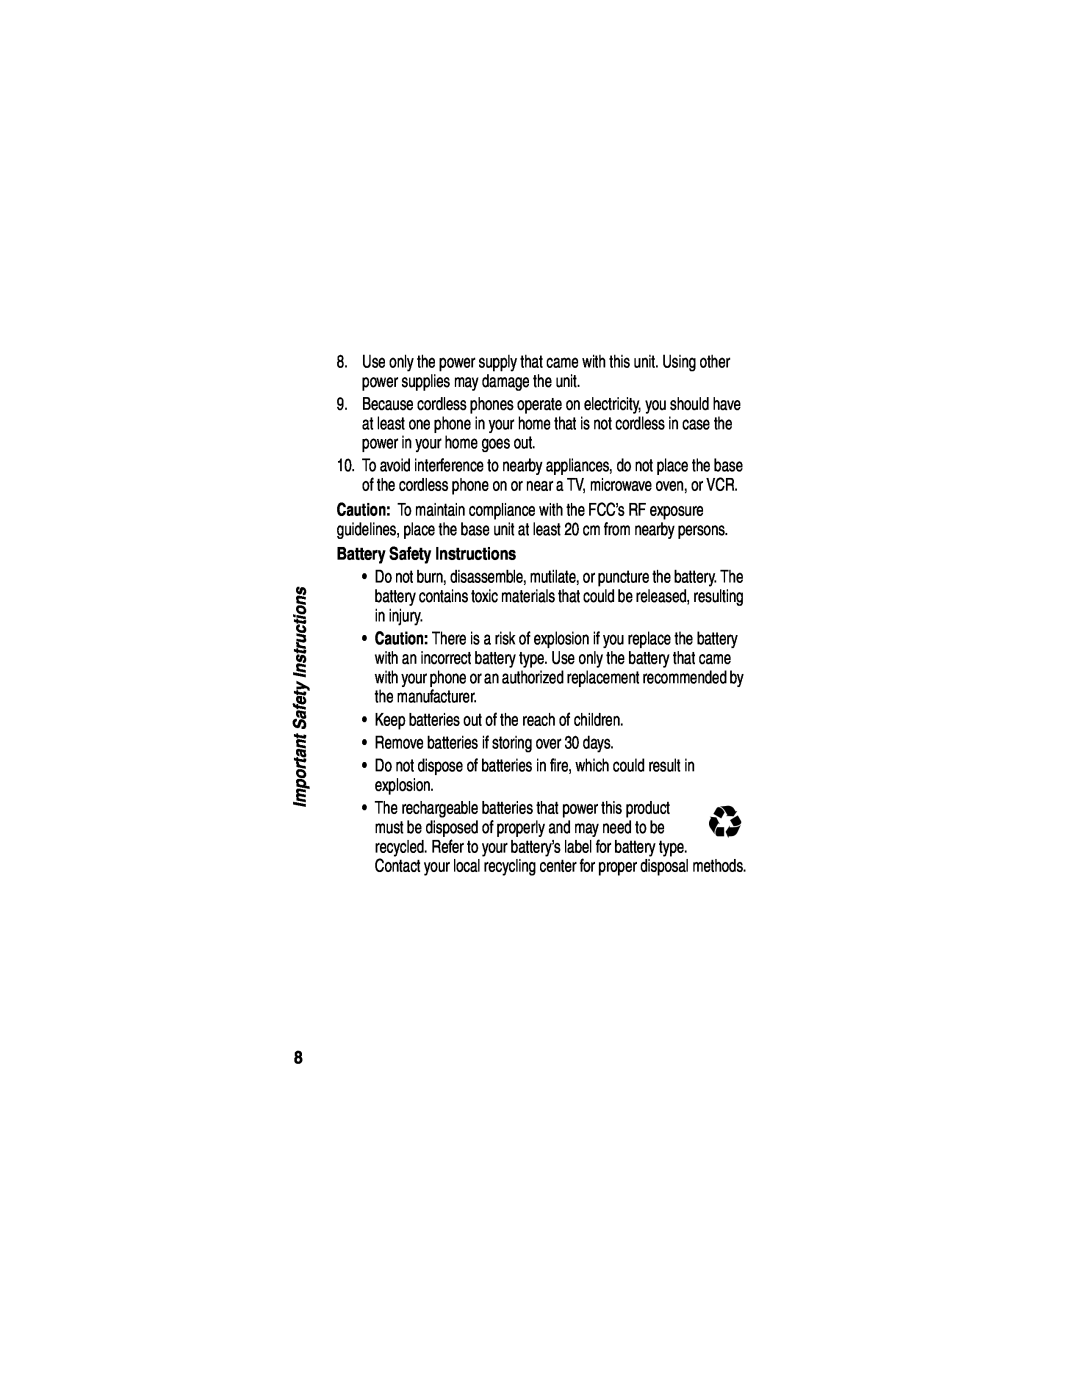 Motorola MD490 Battery Safety Instructions, Keep batteries out of the reach of children, Important Safety Instructions 